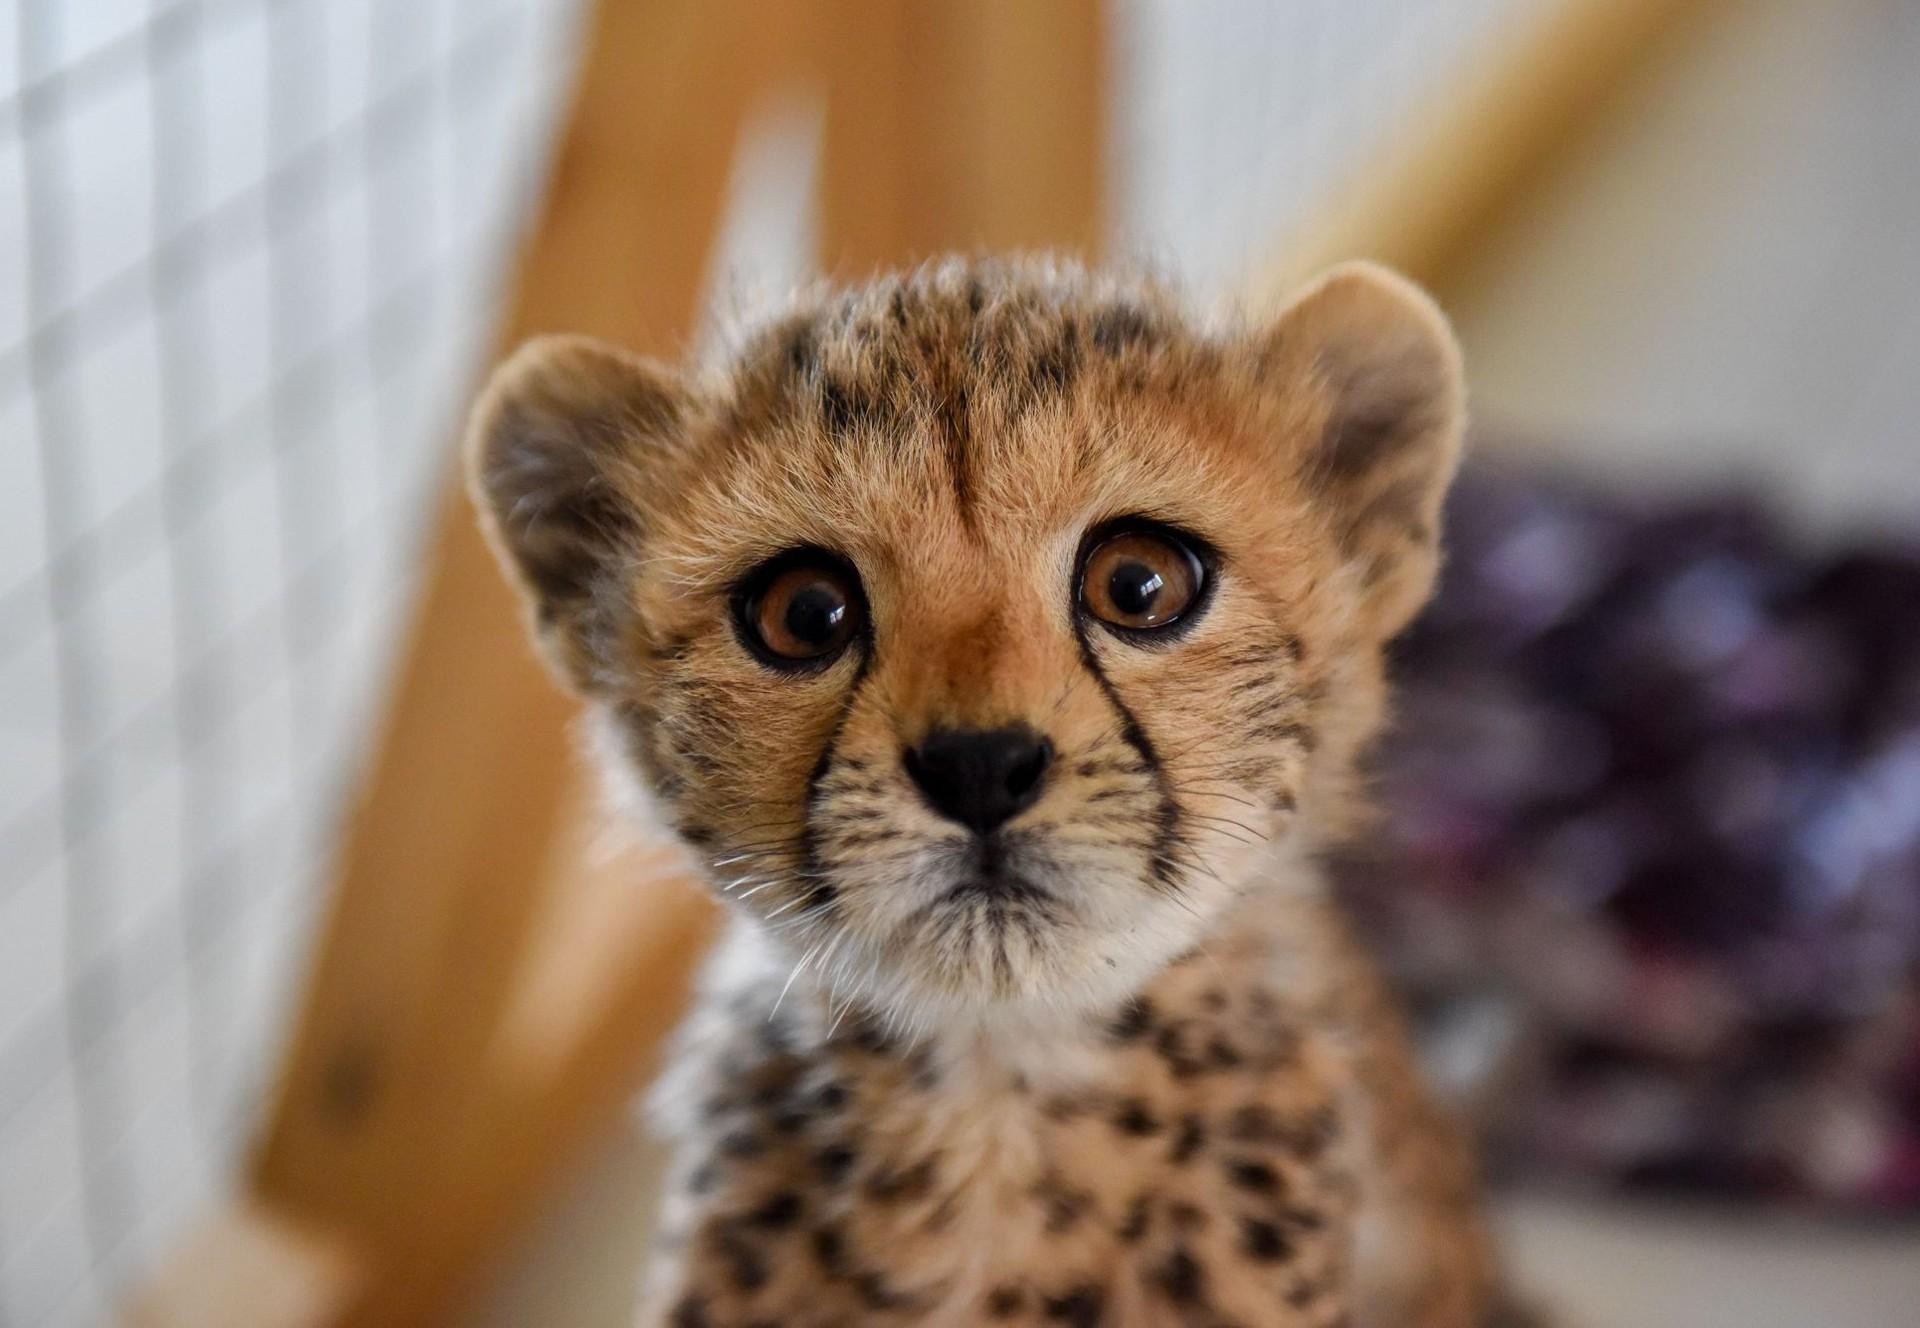 29 orphaned cheetahs in Somaliland in need of food and supplies - FOUR PAWS  in US - Global Animal Protection Organization